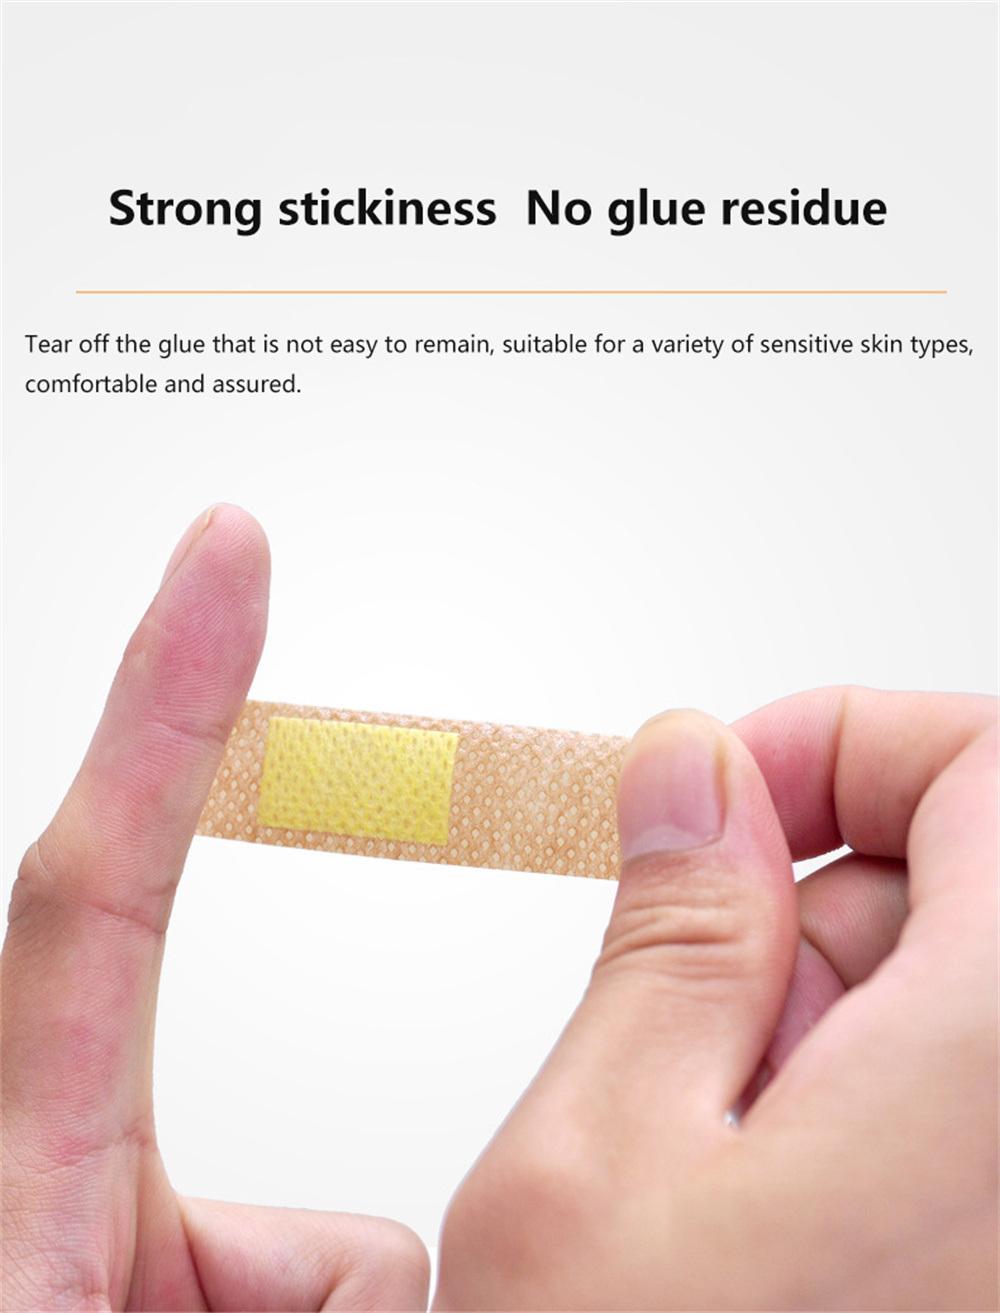 Breathable Band-Aids Waterproof Bandage Band-Aid Adhesive Wound Ultra-Thin Emergency First Aid Bandage